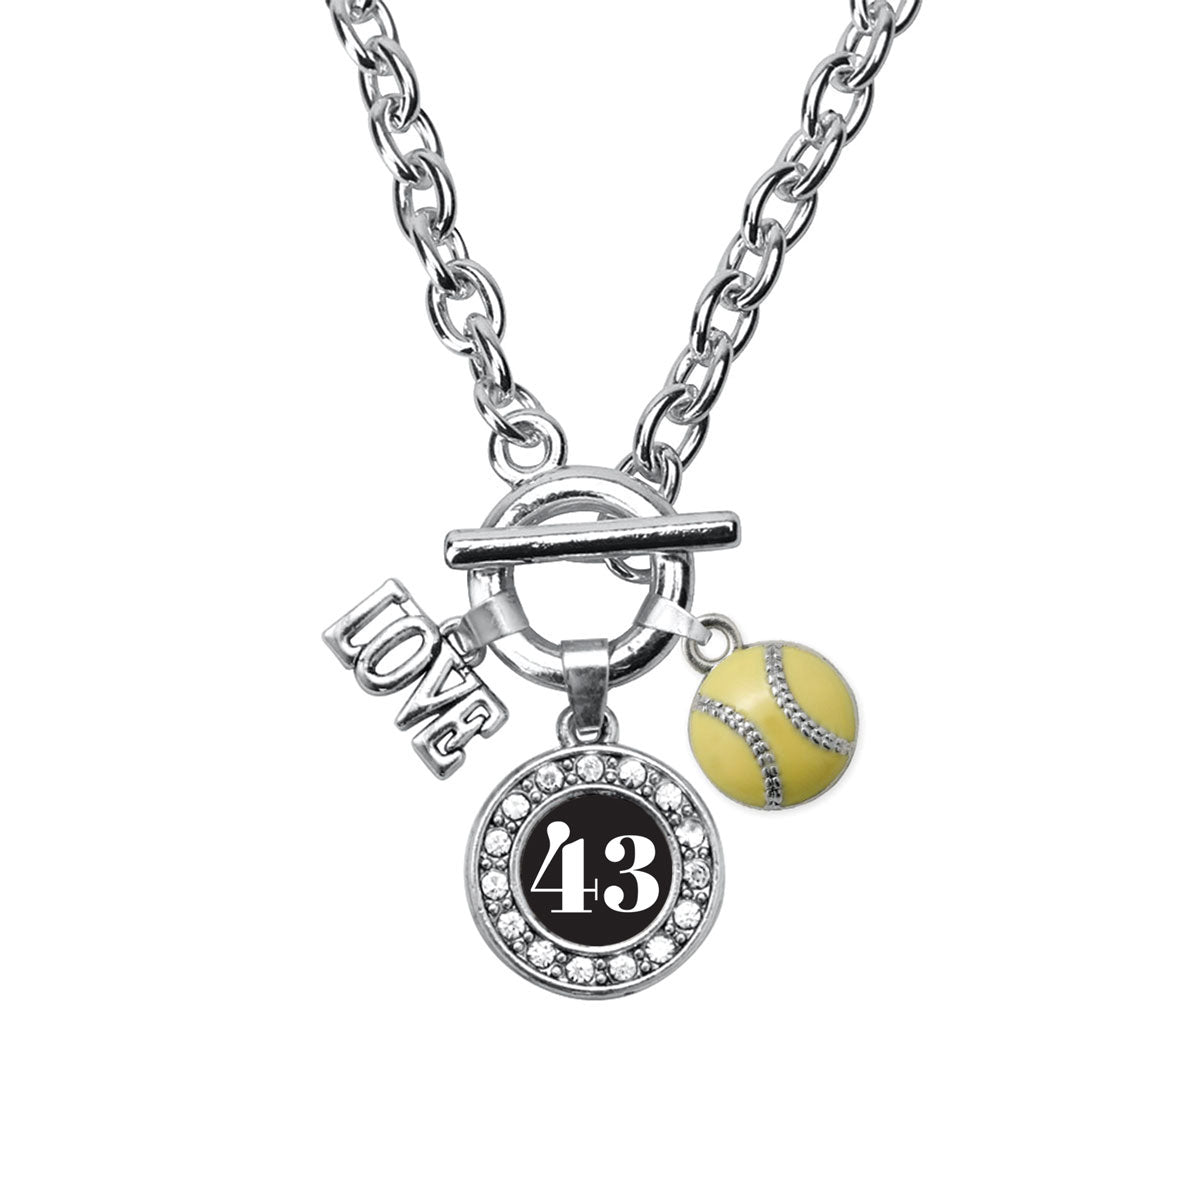 Silver Softball - Sports Number 43 Circle Charm Toggle Necklace